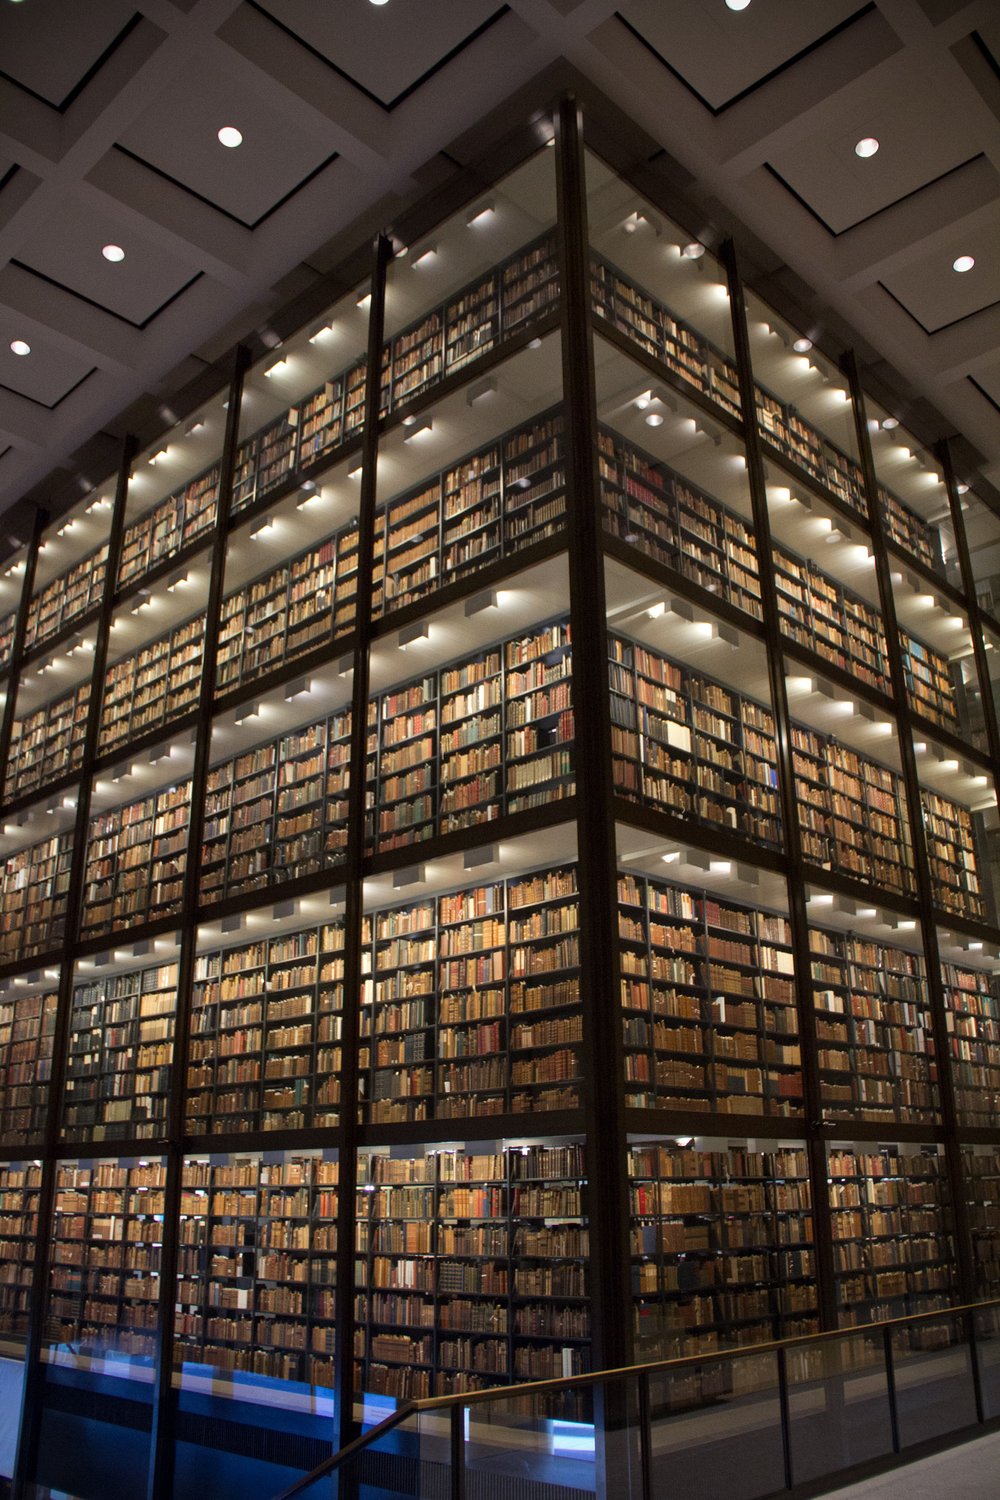 New-Haven-Beinecke-Rare-Book-Library-4.jpg